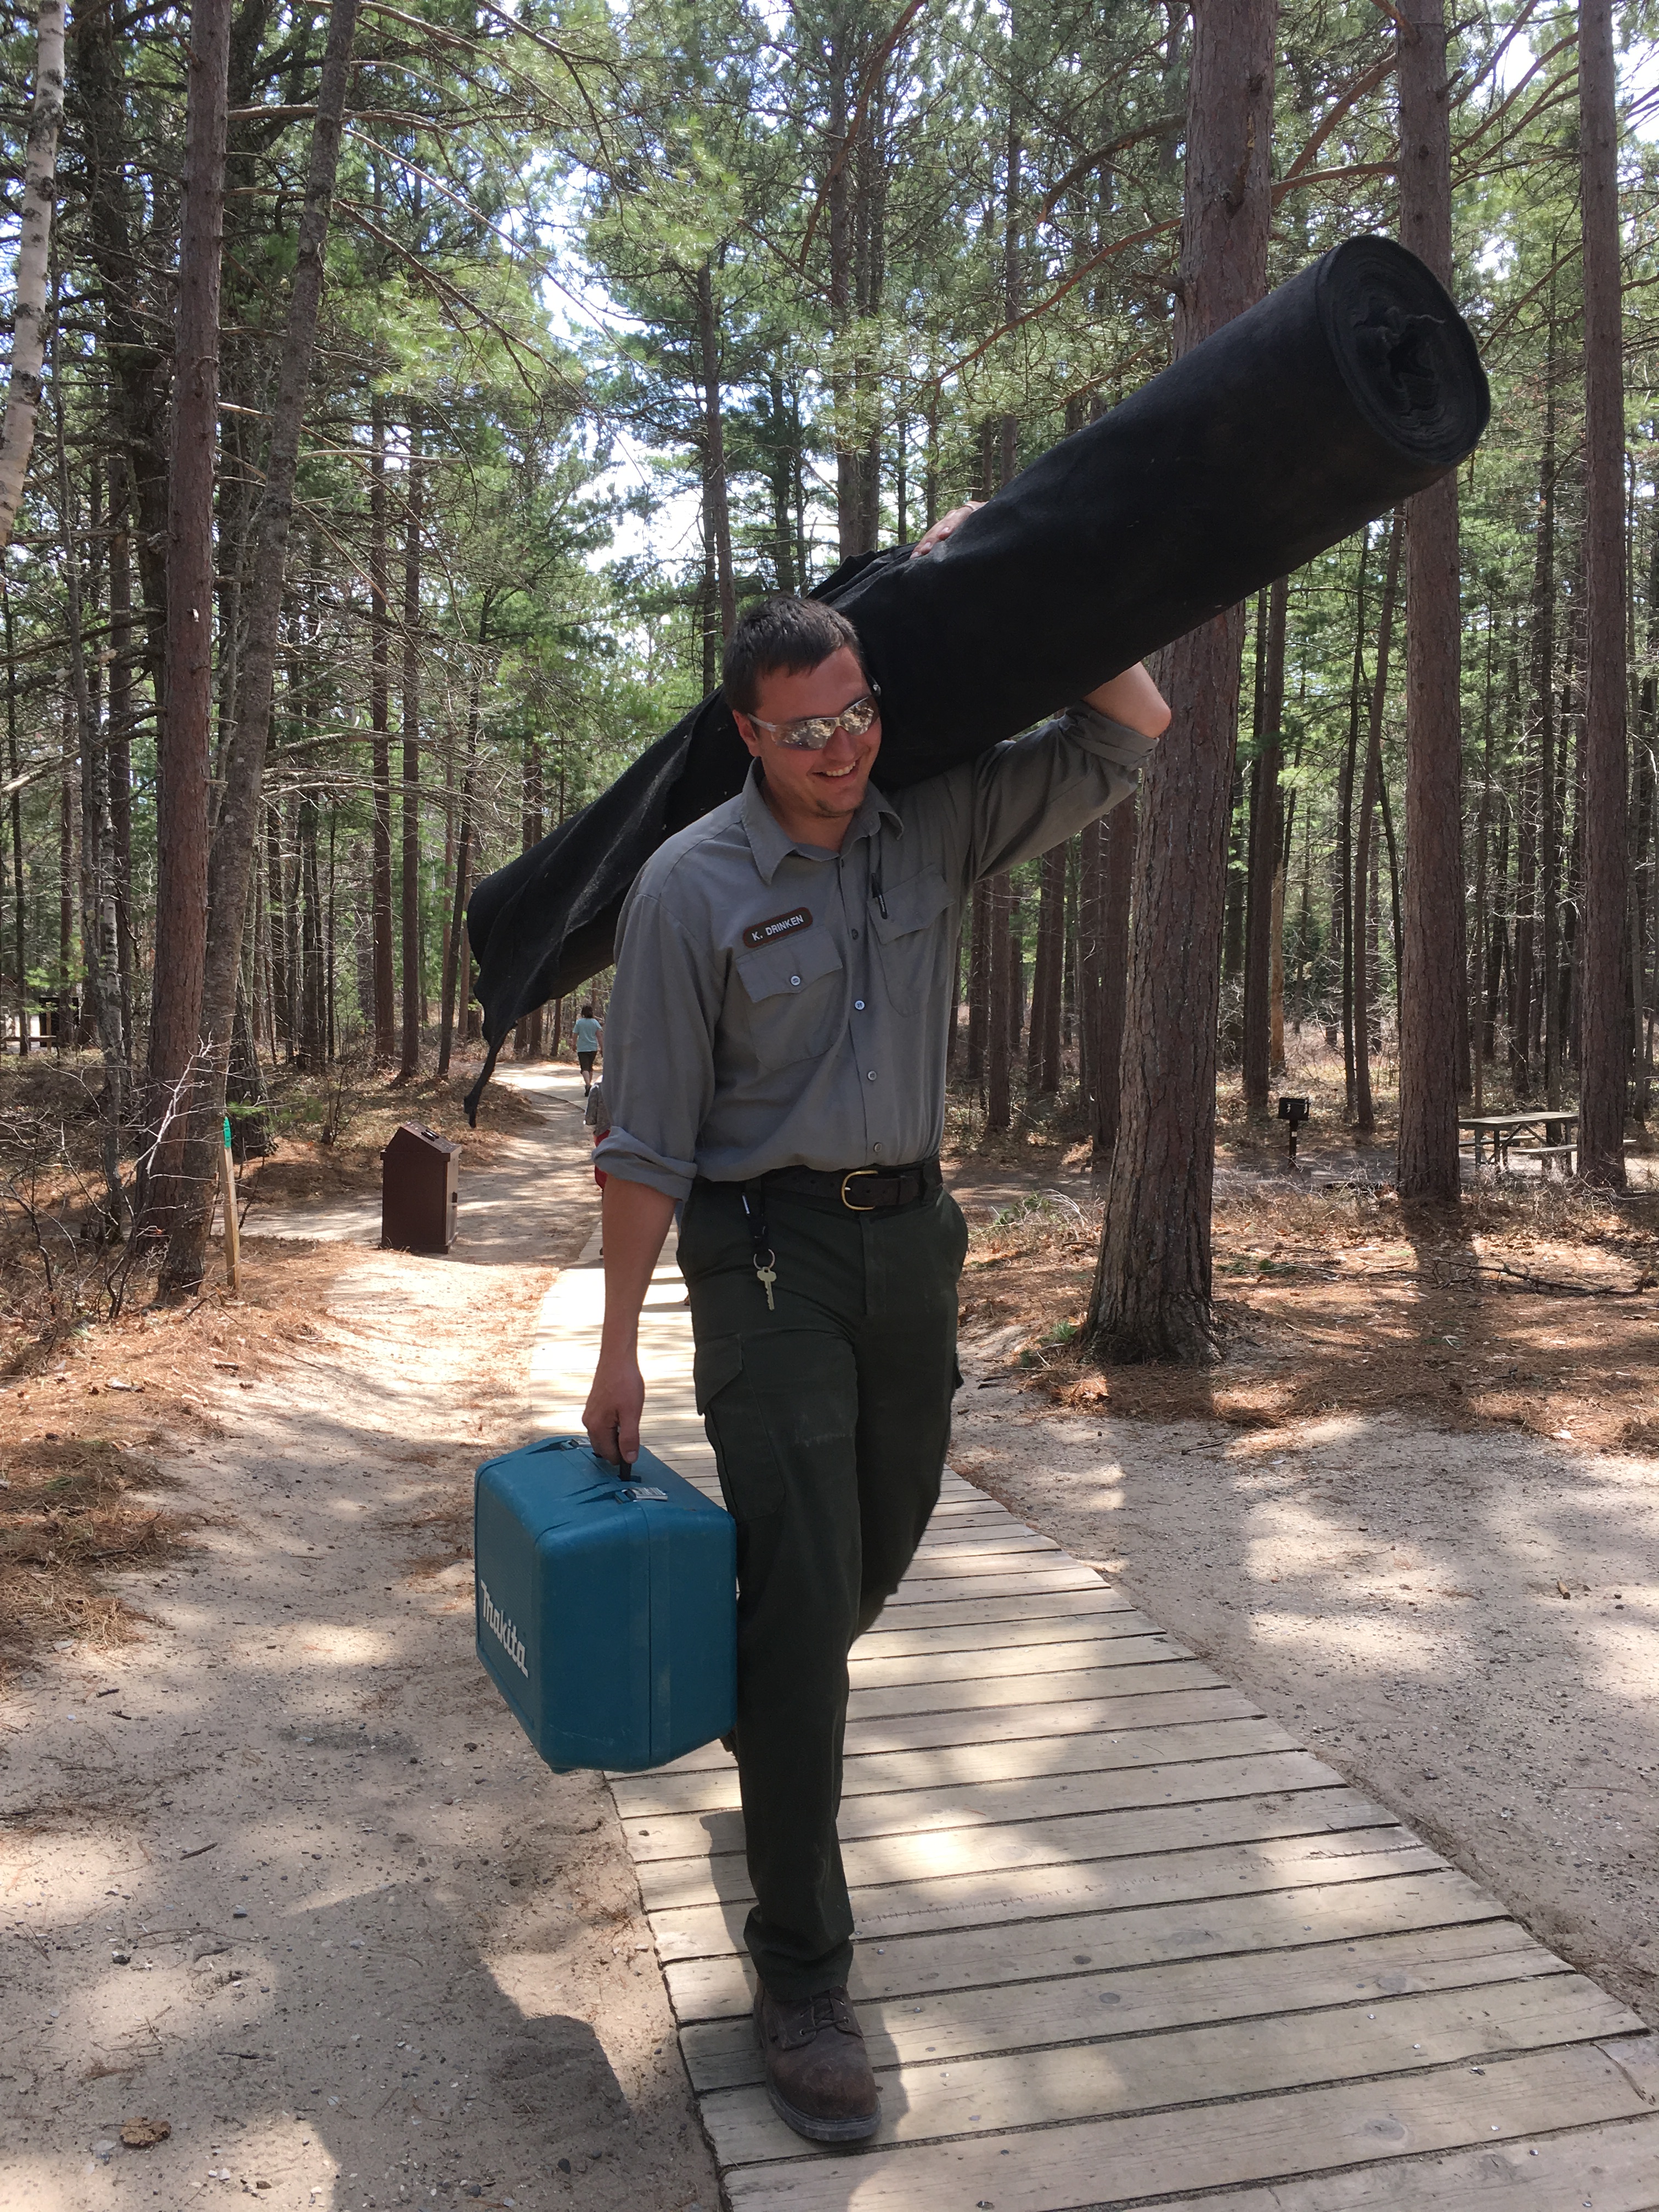 Work With Us - Pictured Rocks National Lakeshore (U.S. National Park Service)